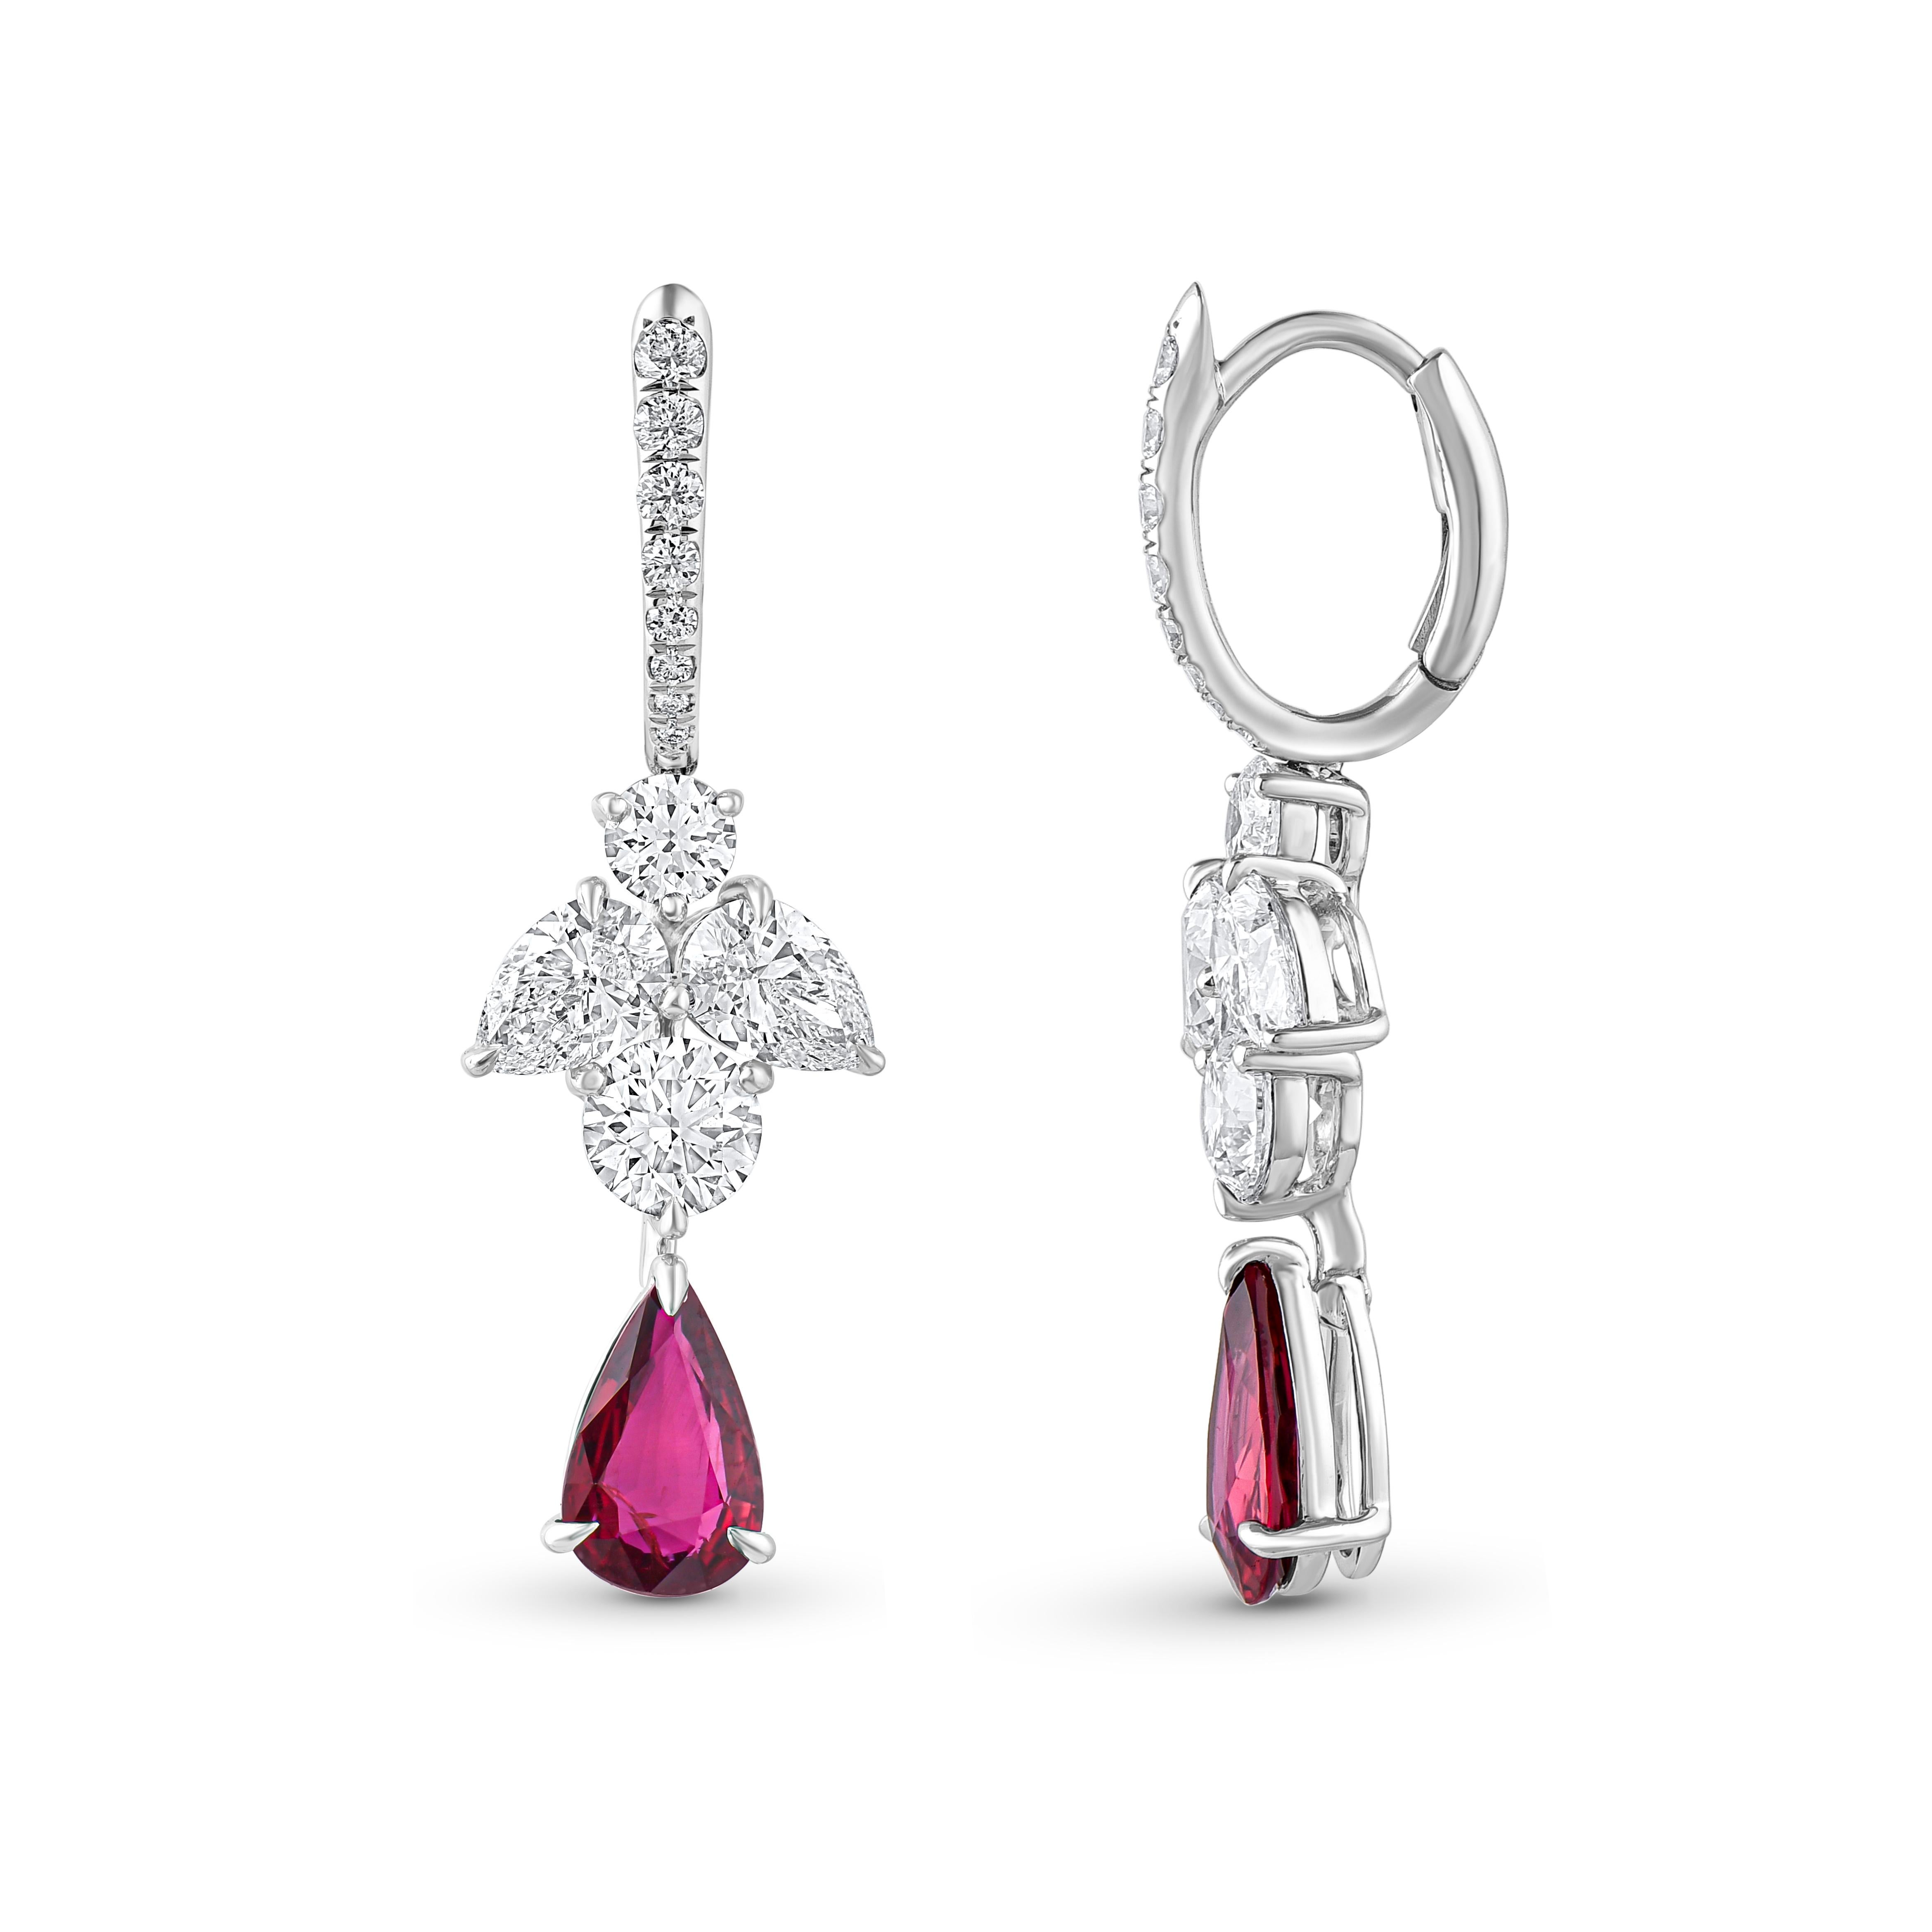 Contemporary HARAKH 3 Carat Brilliant Cut Colorless Diamond and Ruby Gemstone Earrings For Sale